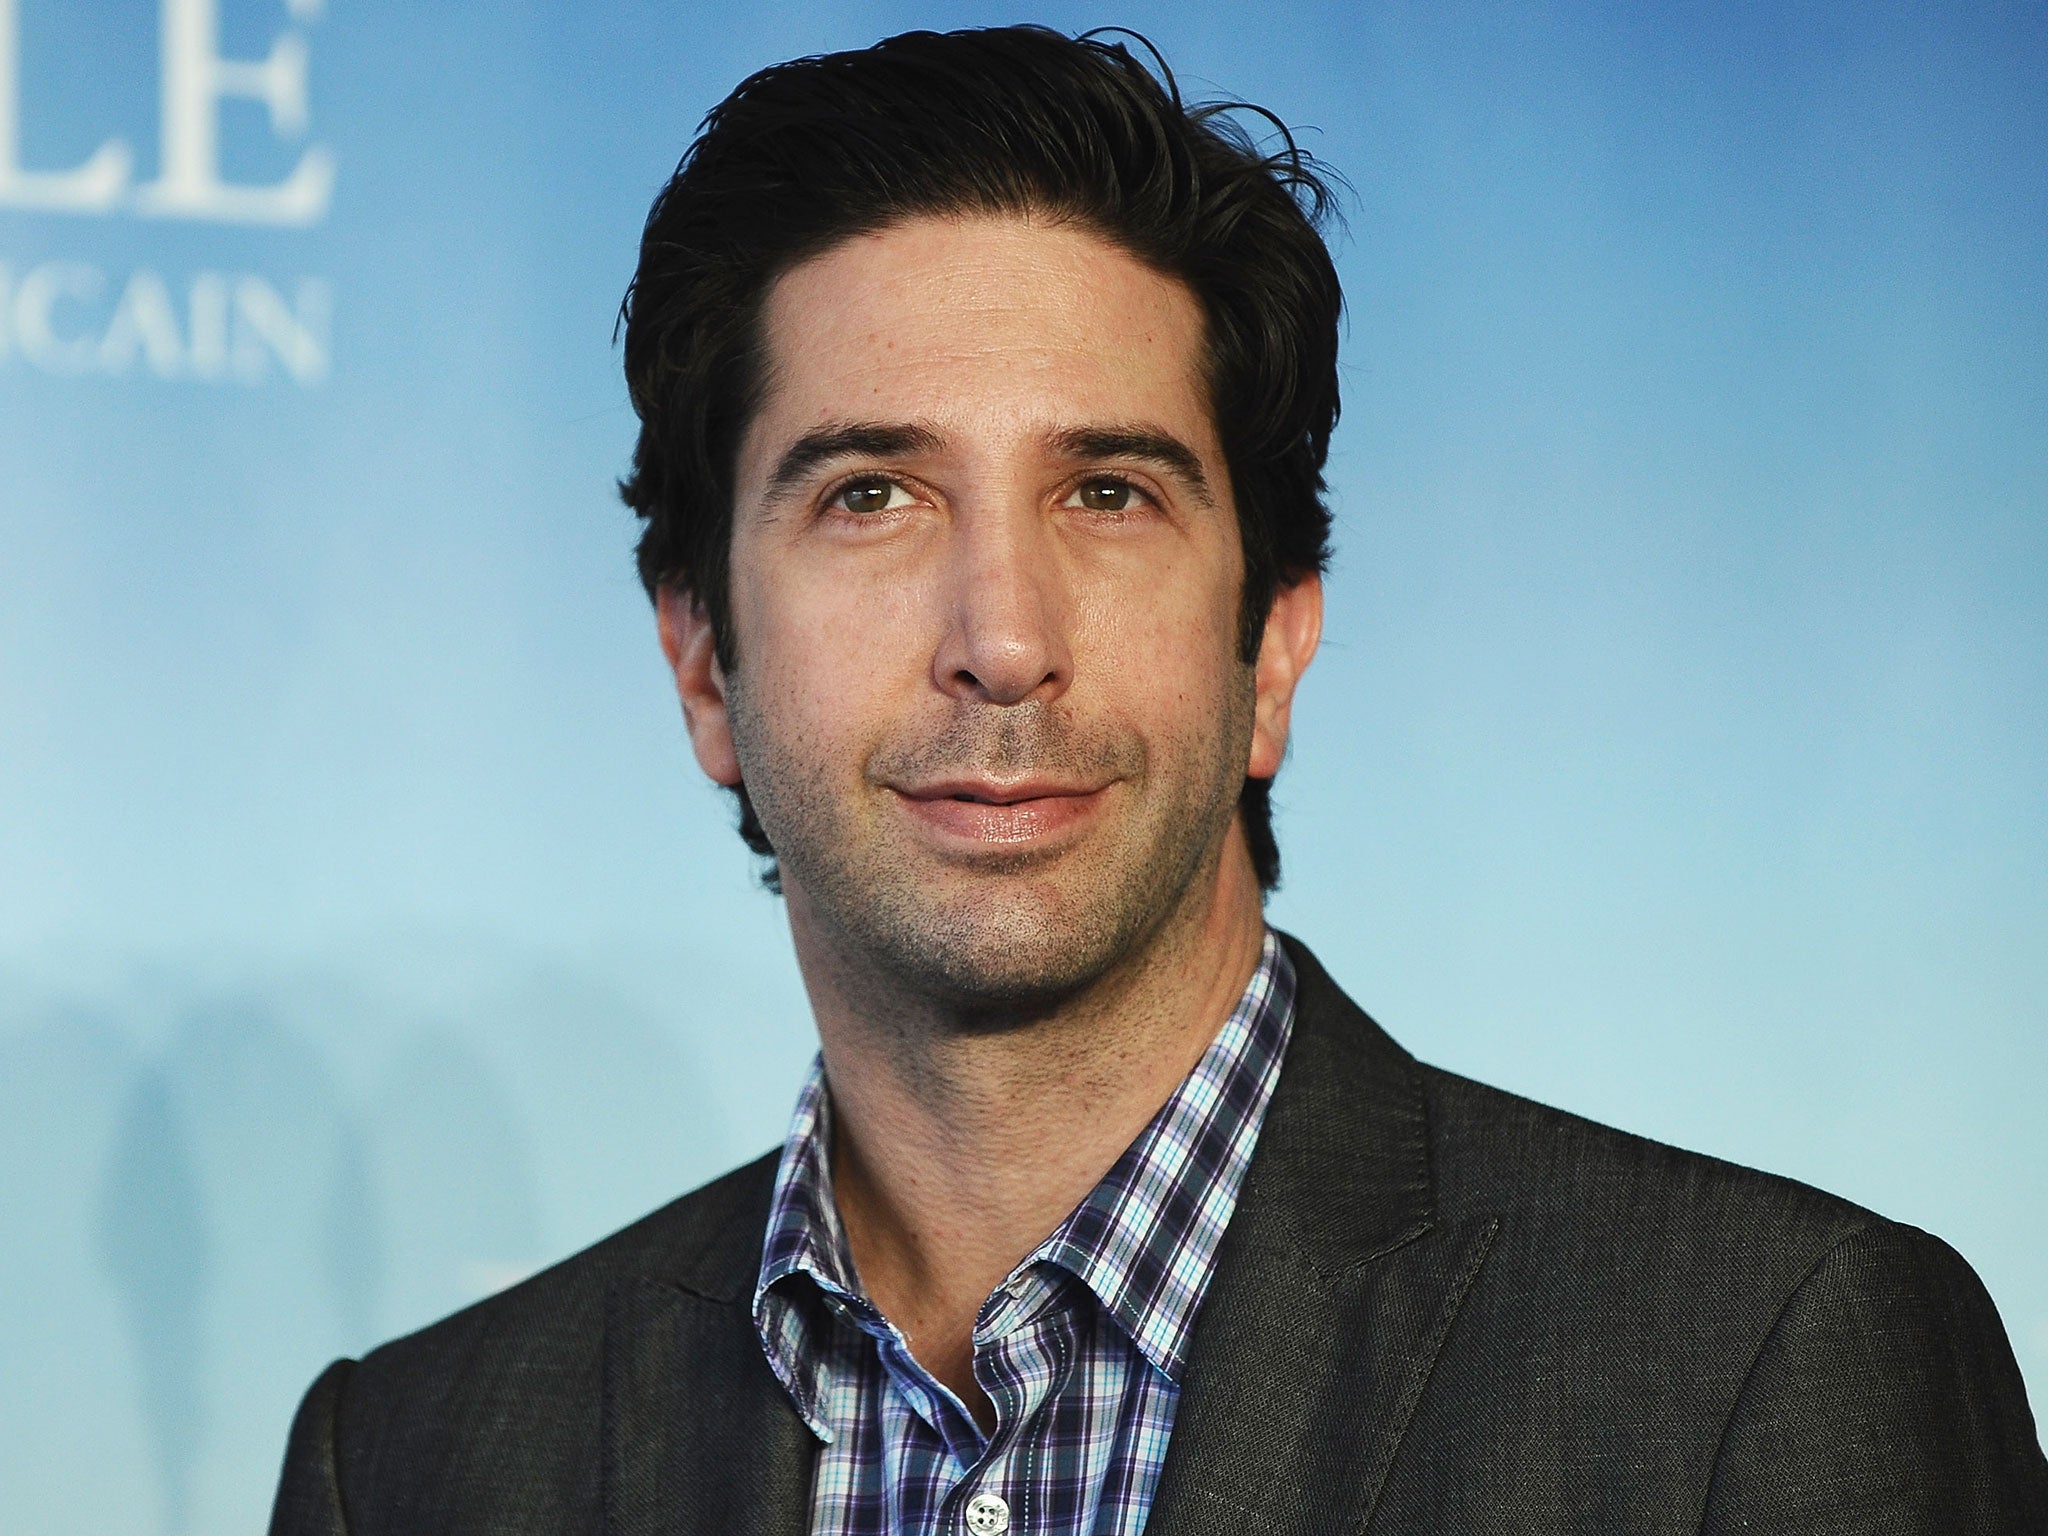 David Schwimmer will play late lawyer Robert Kardashian in American Crime Story: The People v. OJ Simpson